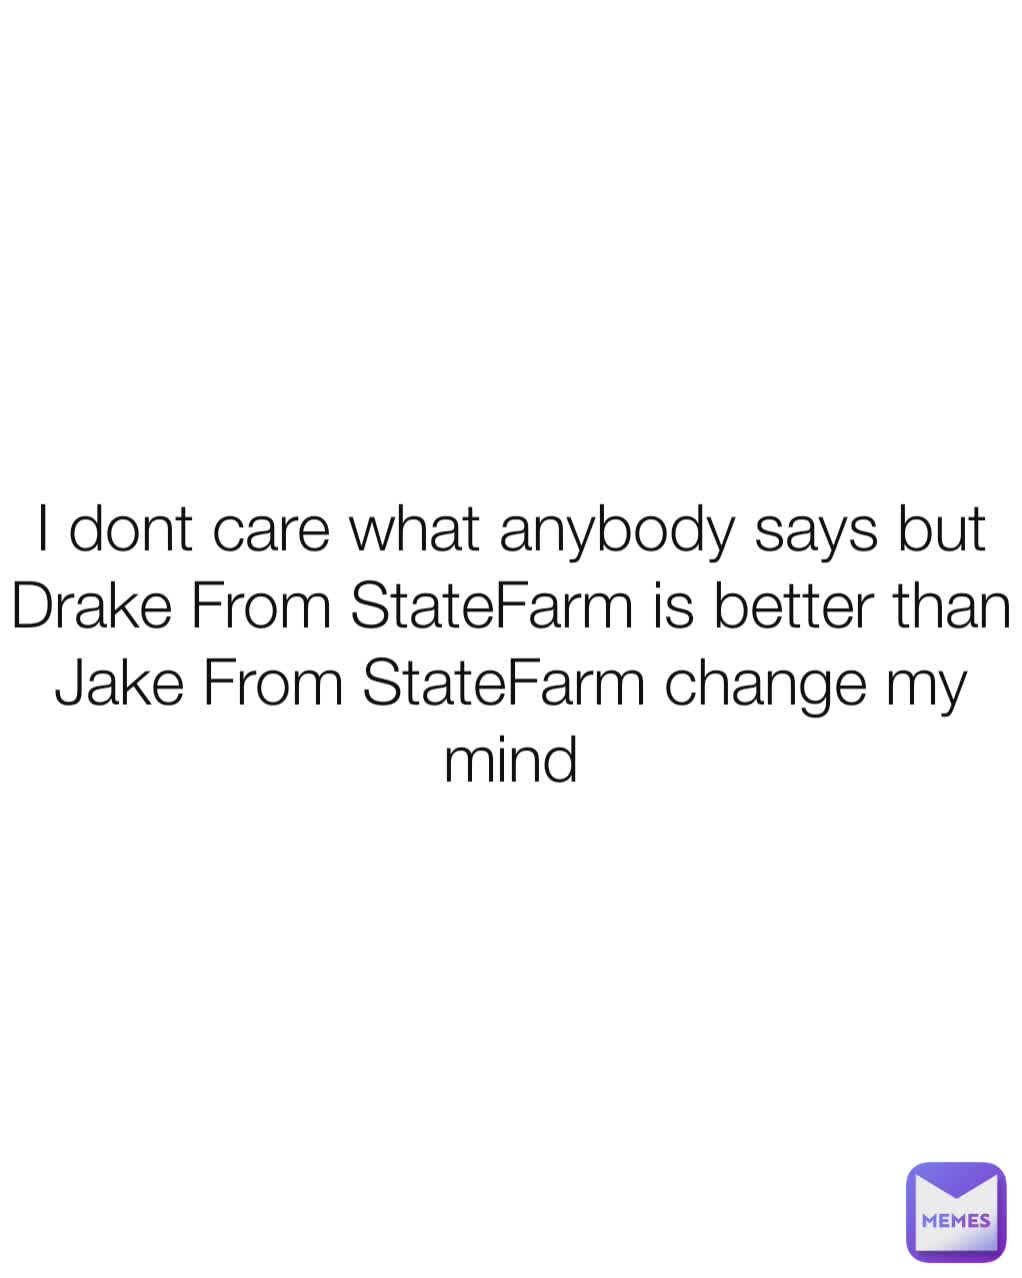 I dont care what anybody says but Drake From StateFarm is better than Jake From StateFarm change my mind